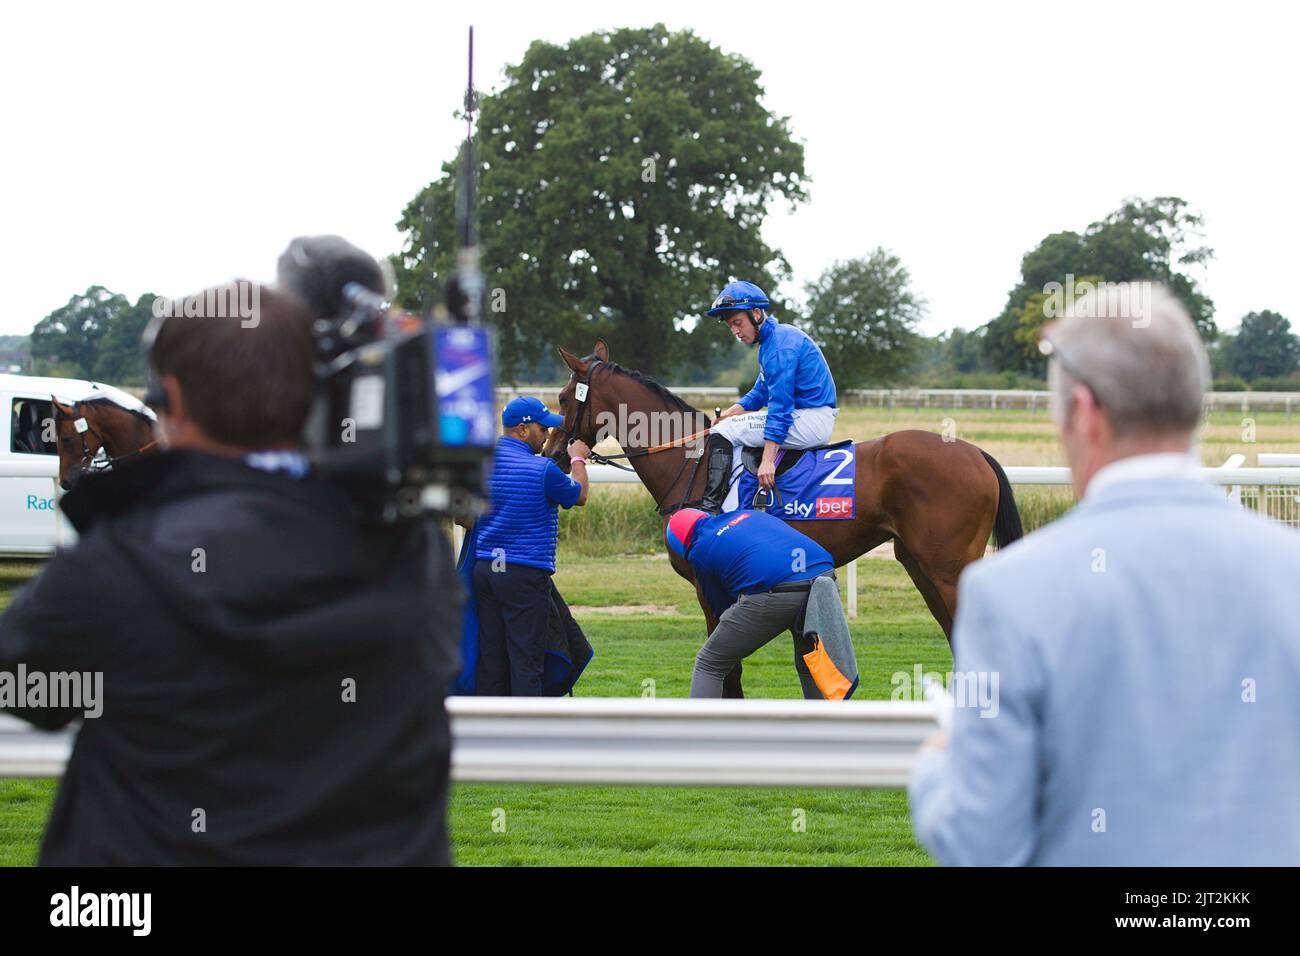 Jockey Ray Dawson riding Mawj getting ready to ride at York Races while ITV's Mick Fitzgerald looks on. Stock Photo